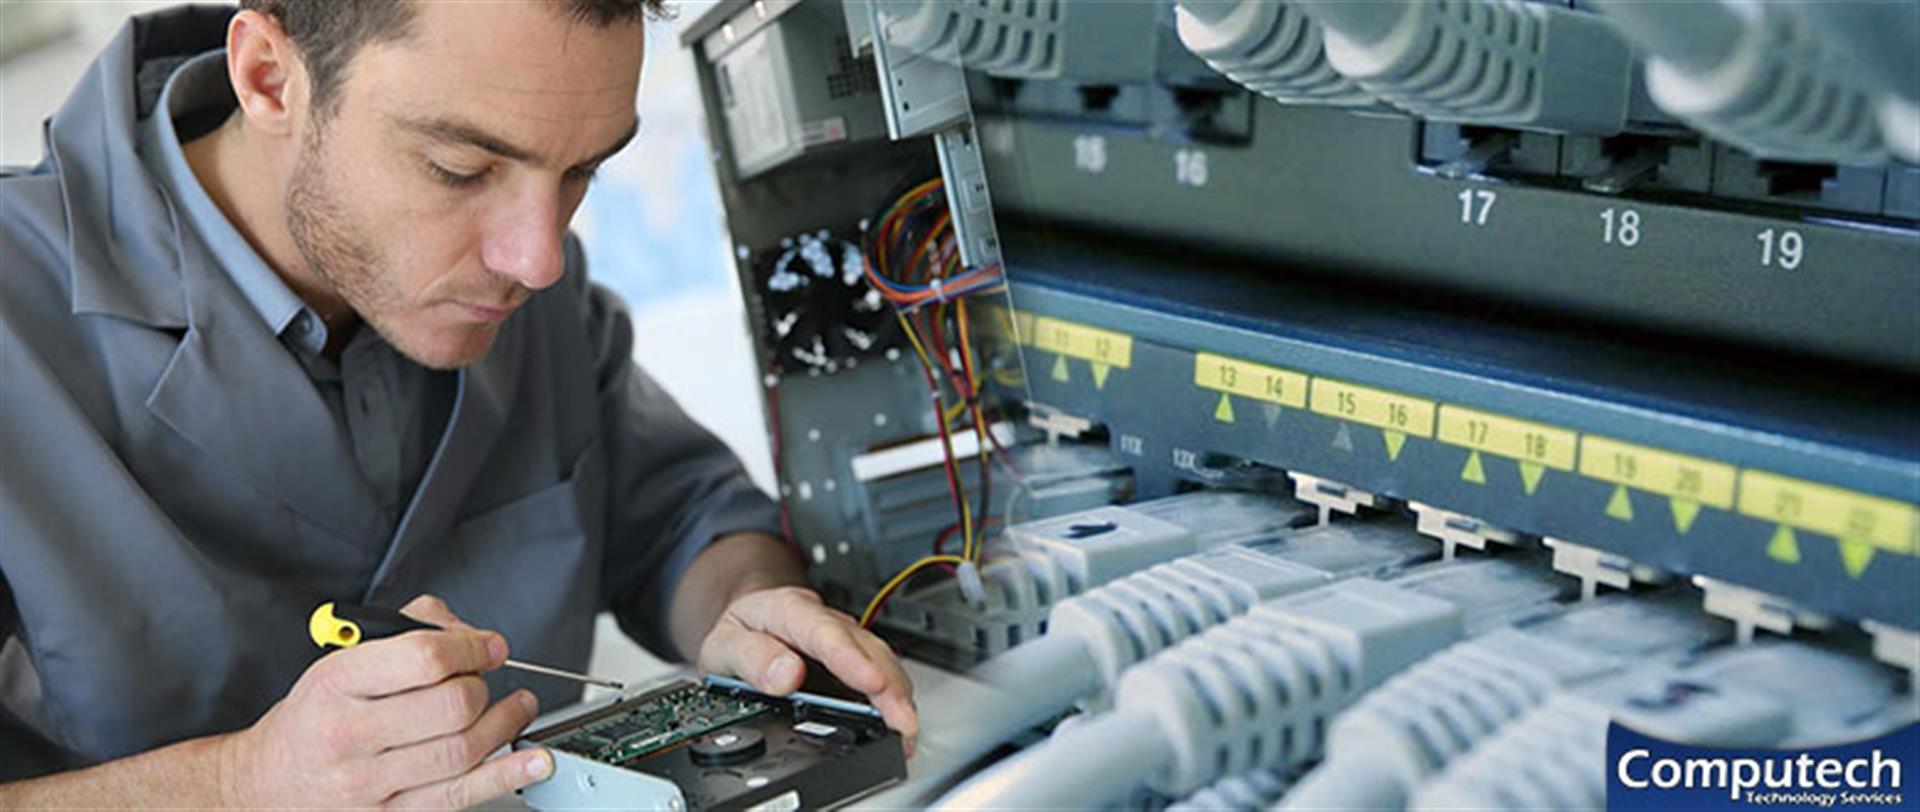 Thomasville Alabama Onsite Computer & Printer Repair, Network, Voice & Data Low Voltage Cabling Services